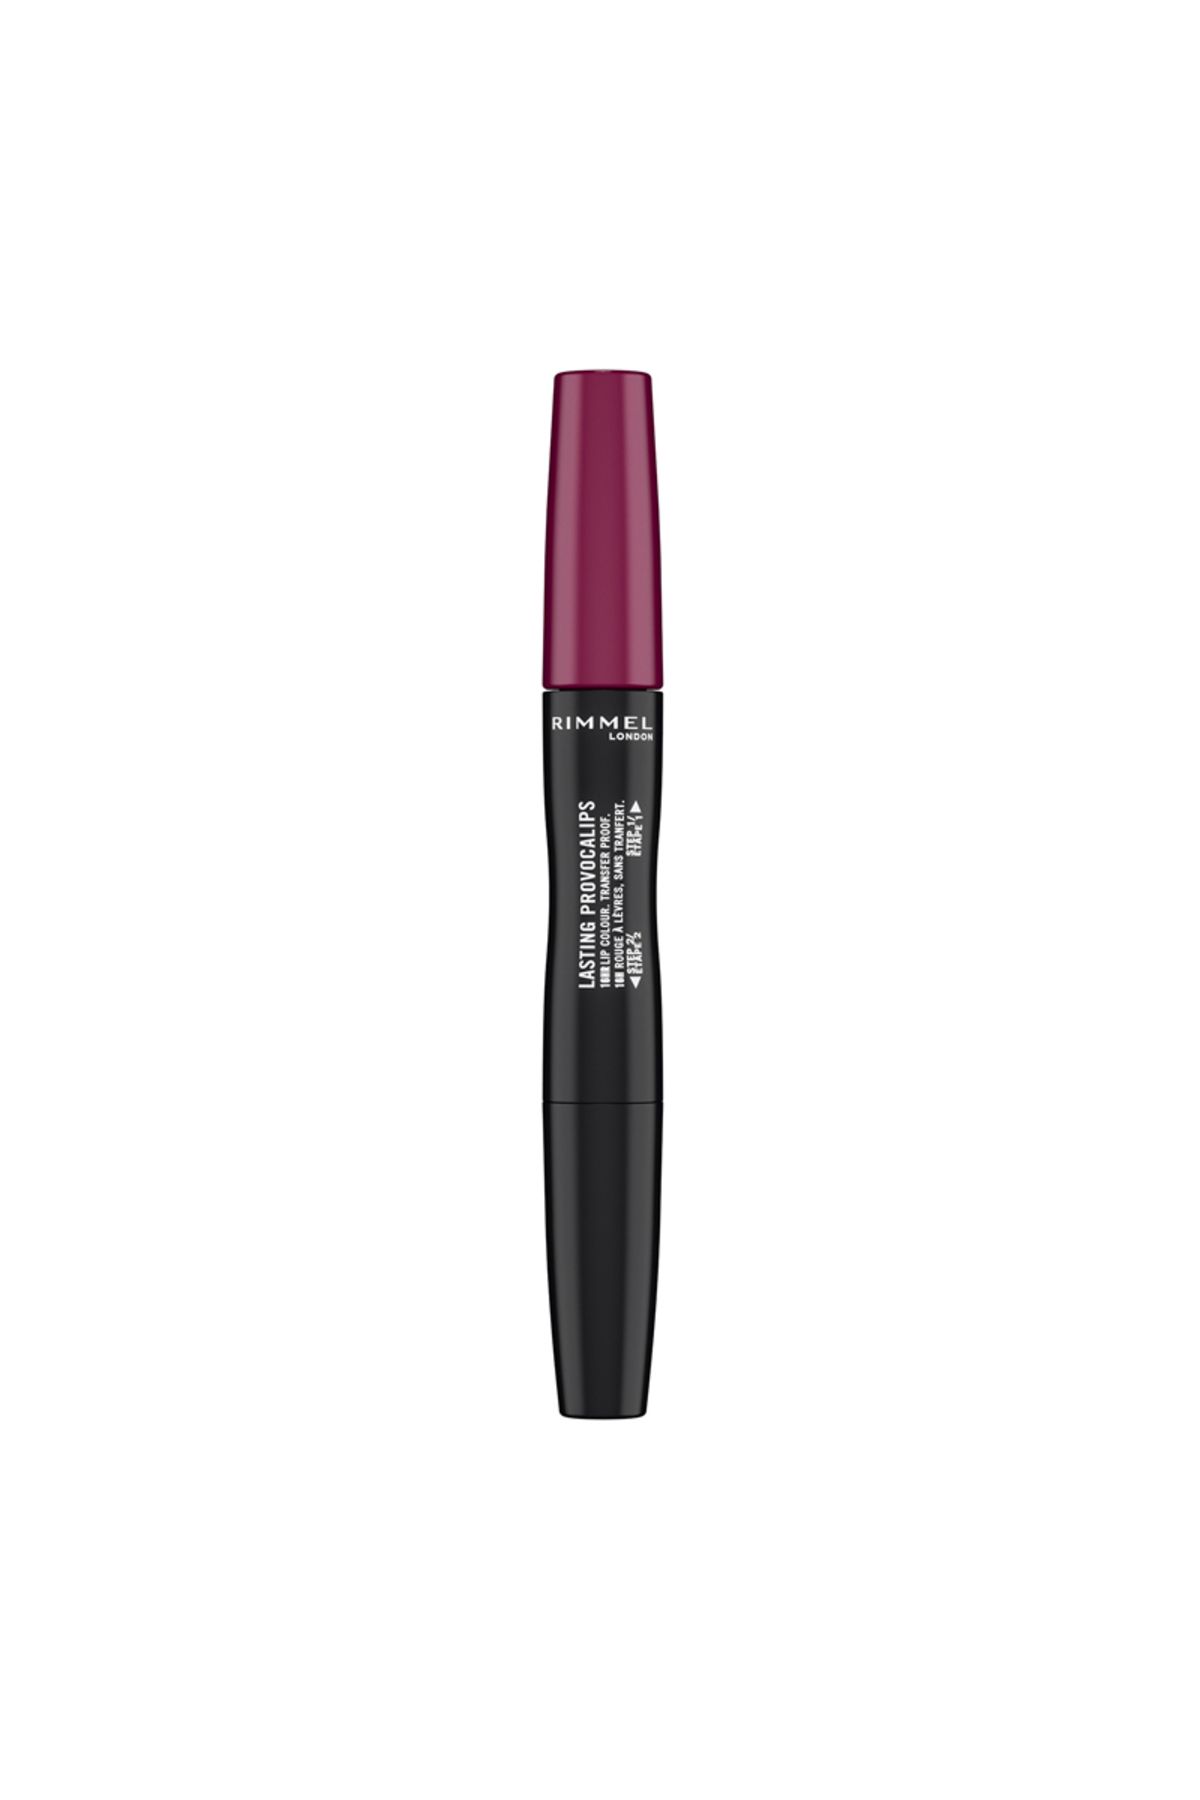 Rimmel London Provocalips Lip Colour 440 Maroon Swoon